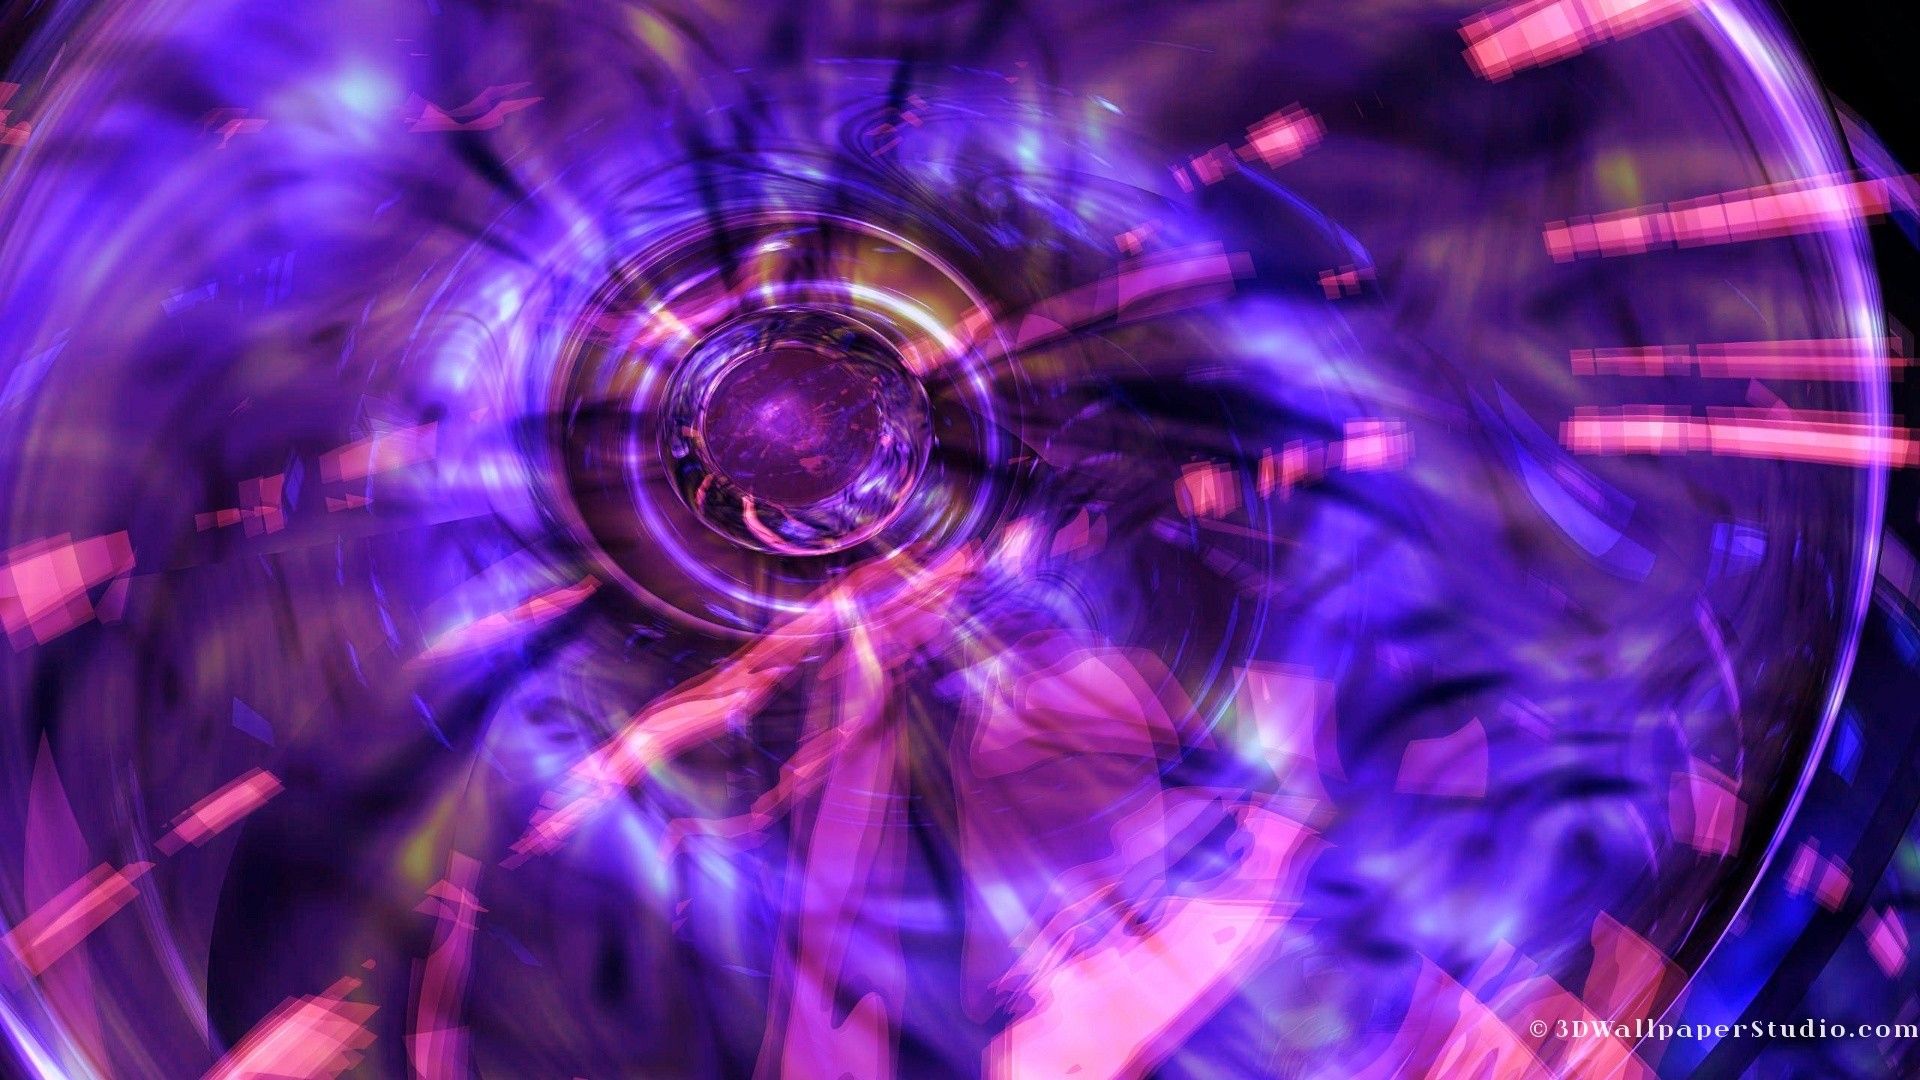 An abstract image of a purple and pink circular light - Glitch